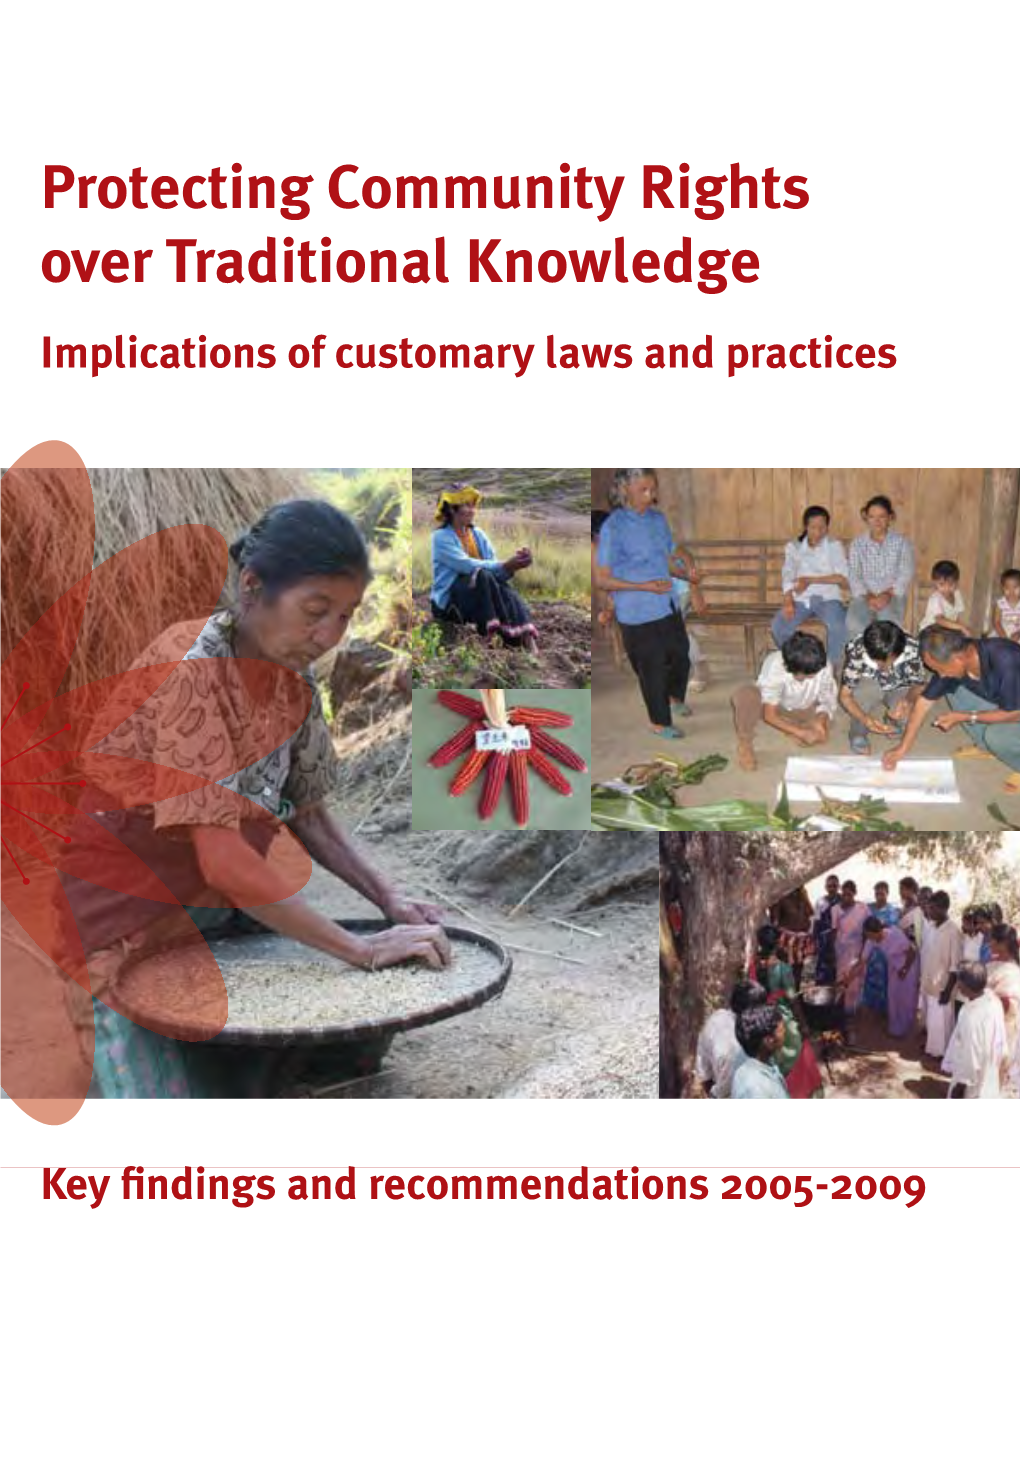 Protecting Community Rights Over Traditional Knowledge: Implications of Customary Laws and Practices